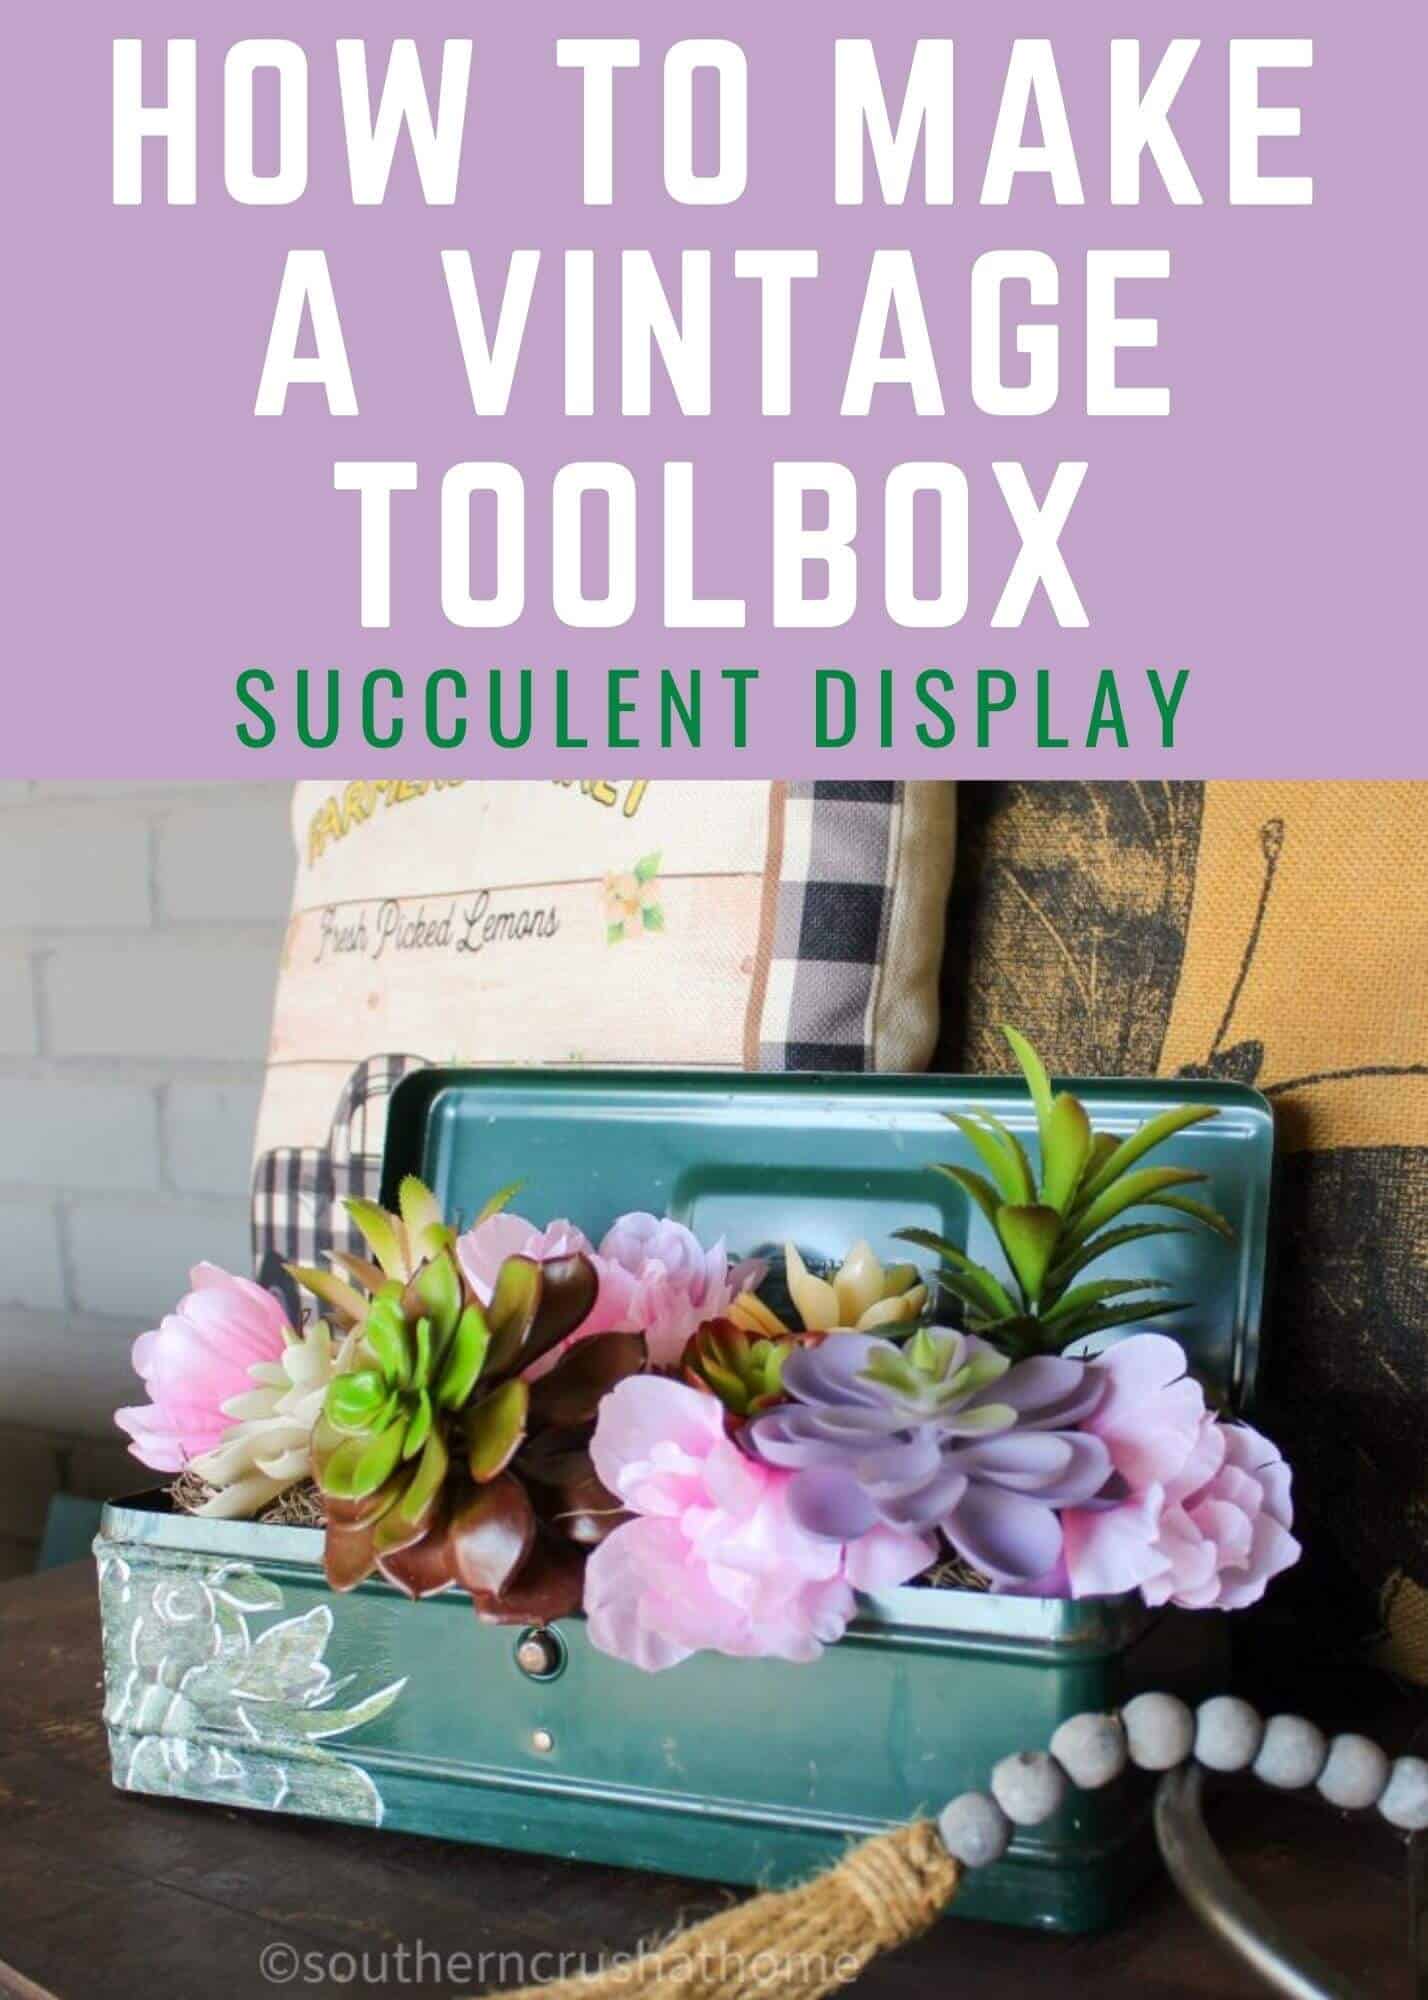 How-To-Make-A-Vintage-Toolbox-Succulent-Display